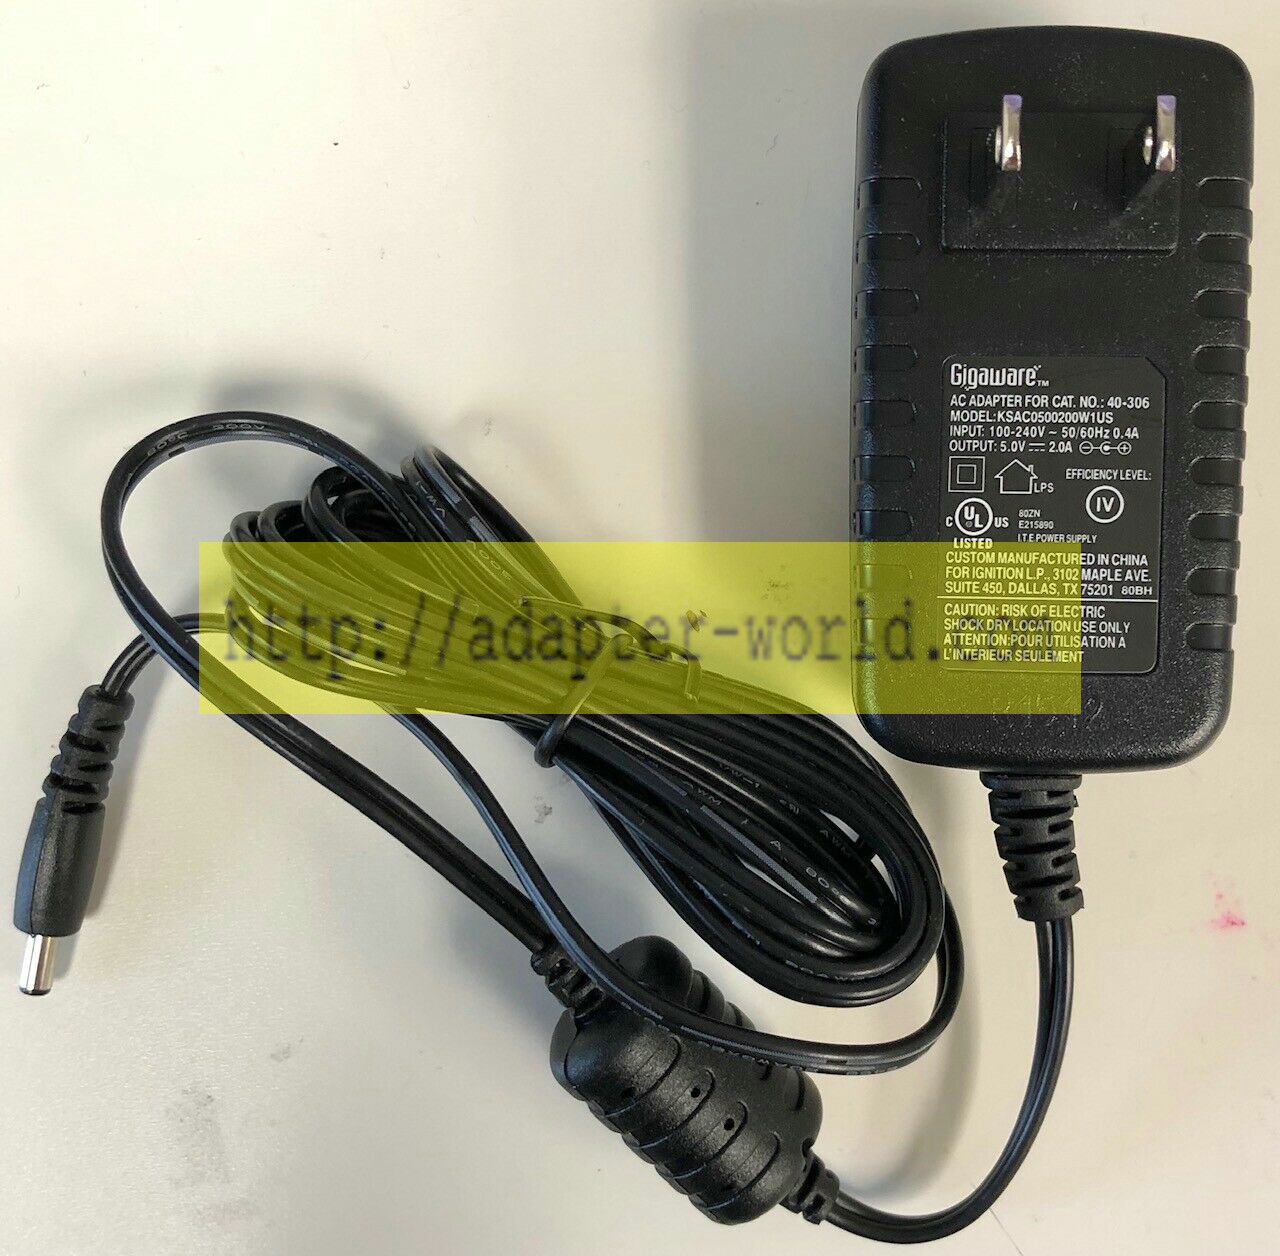 *Brand NEW*Gigaware KSAC0500200W1US 40-306 5.0V 2.0A AC DC Adapter POWER SUPPLY - Click Image to Close